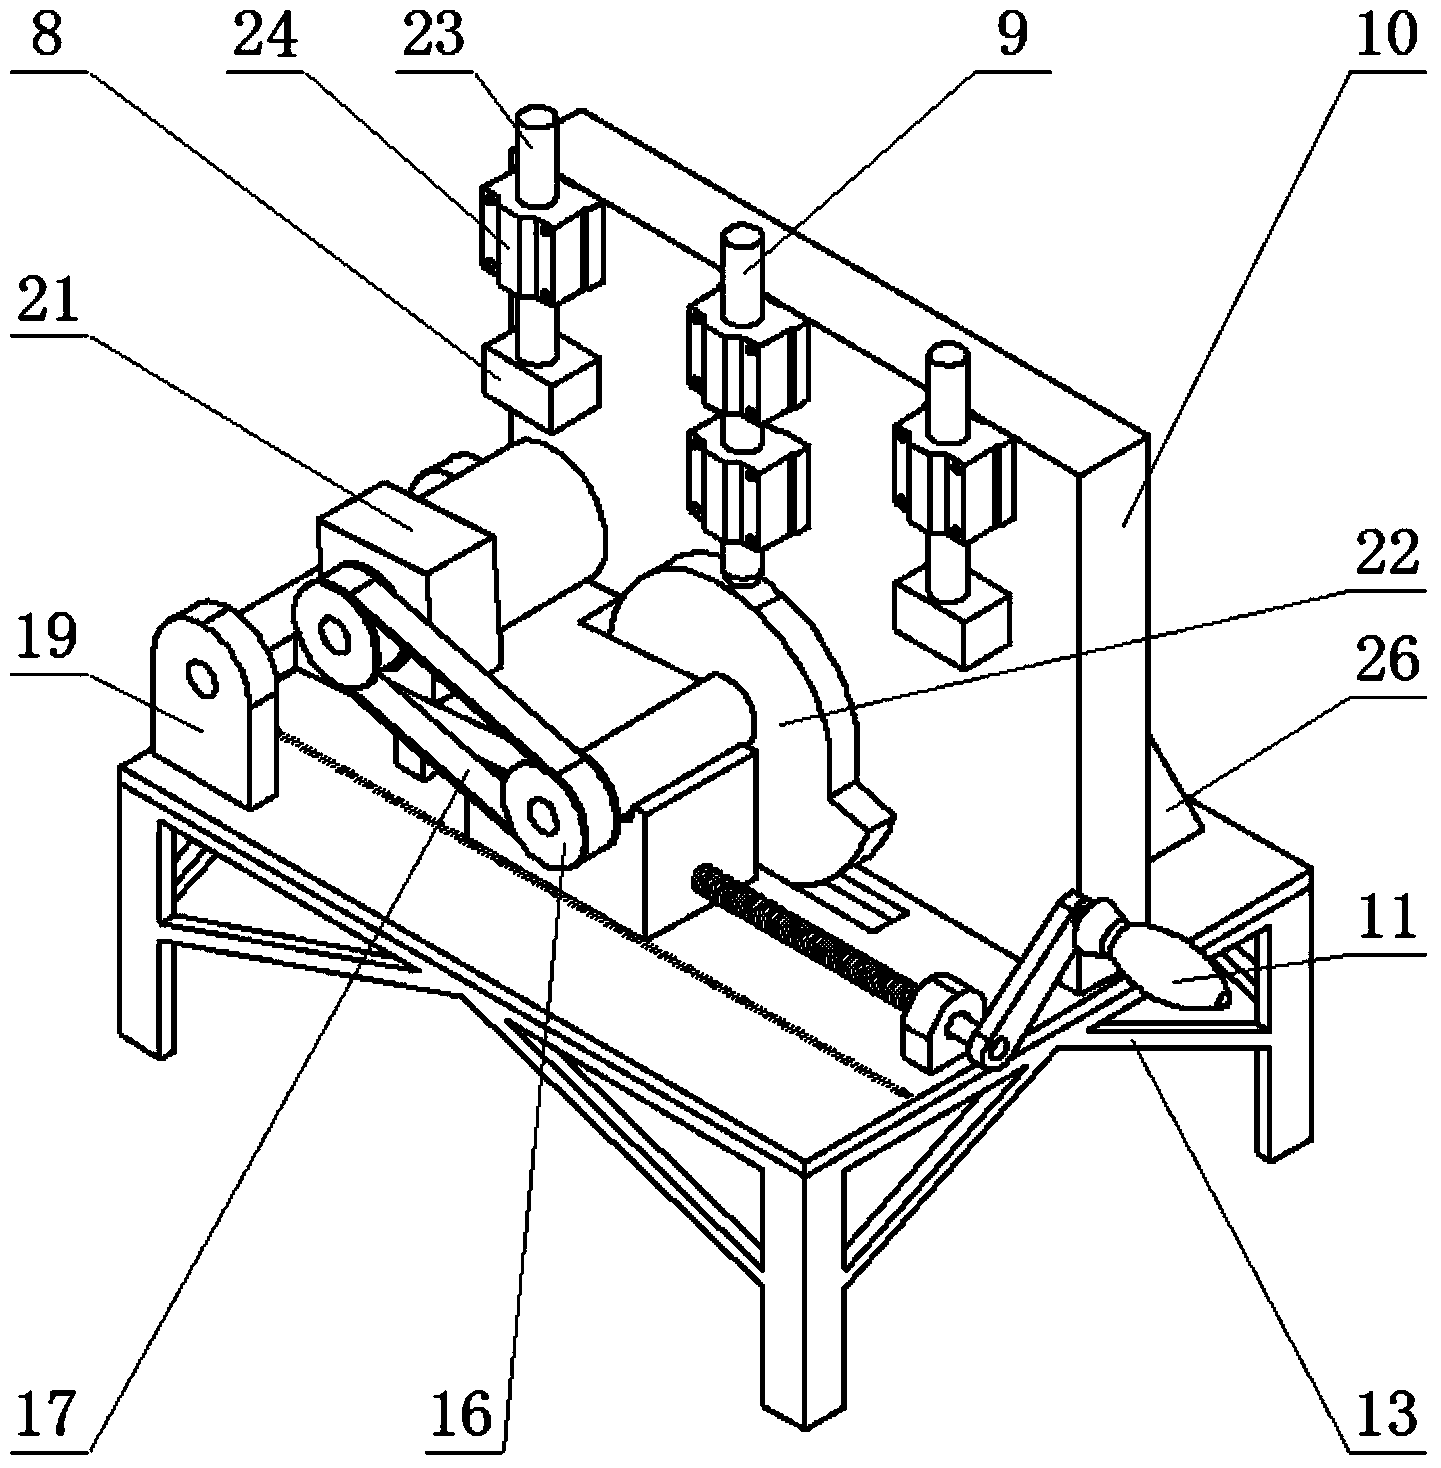 Frequency and amplitude adjustable mud sample vibration device